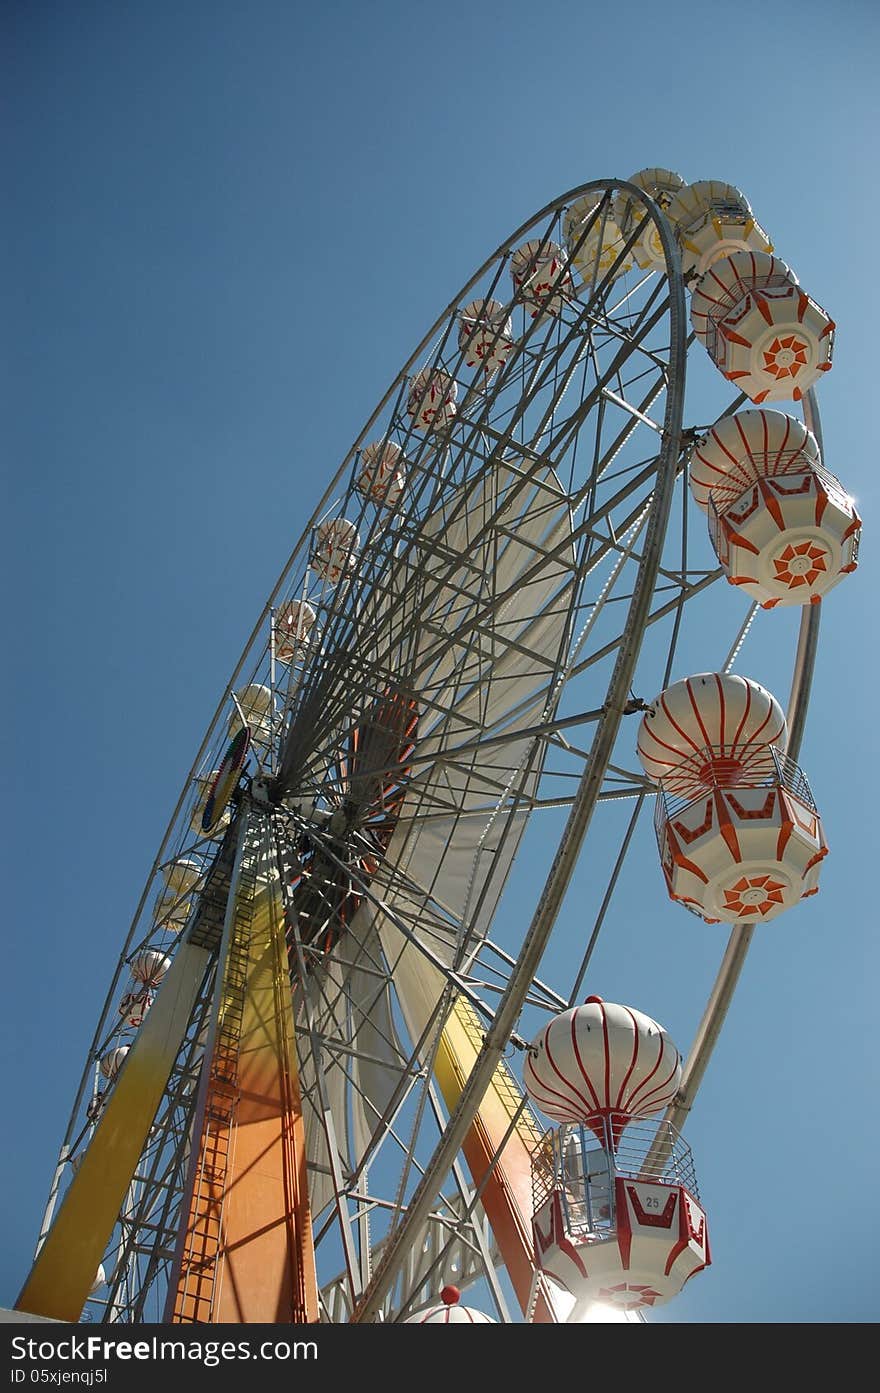 A Ferris wheel (also known as an observation wheel or big wheel) is a nonbuilding structure consisting of a rotating upright wheel with passenger cars (sometimes referred to as gondolas or capsules) attached to the rim in such a way that as the wheel turns, the cars are kept upright, usually by gravity.